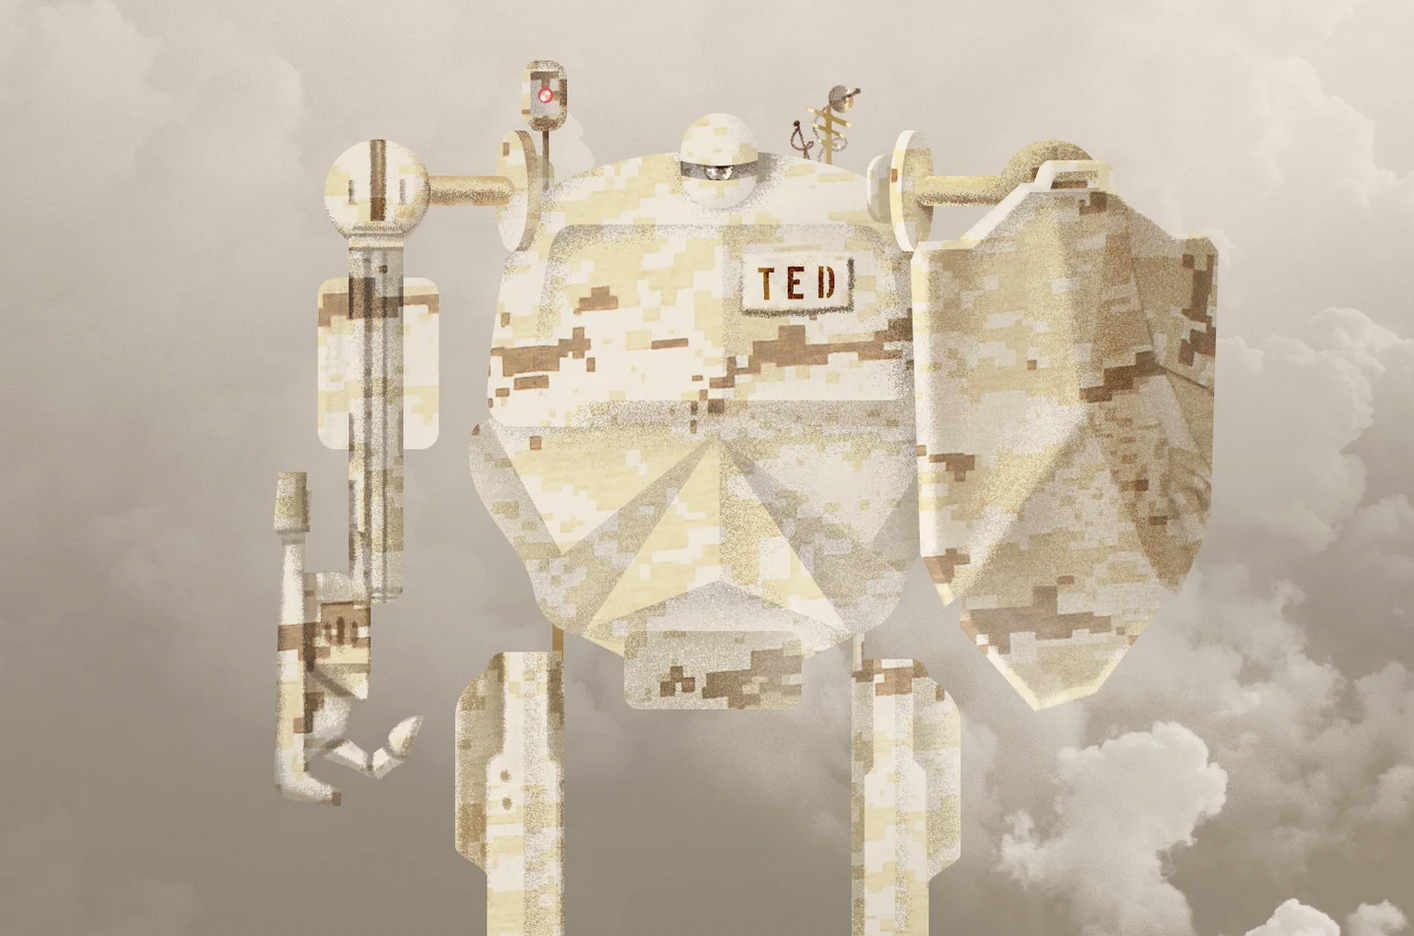 An illustration of a heavily armed robotic soldier in beige-and-brown camo, holding a weapon and a shield.